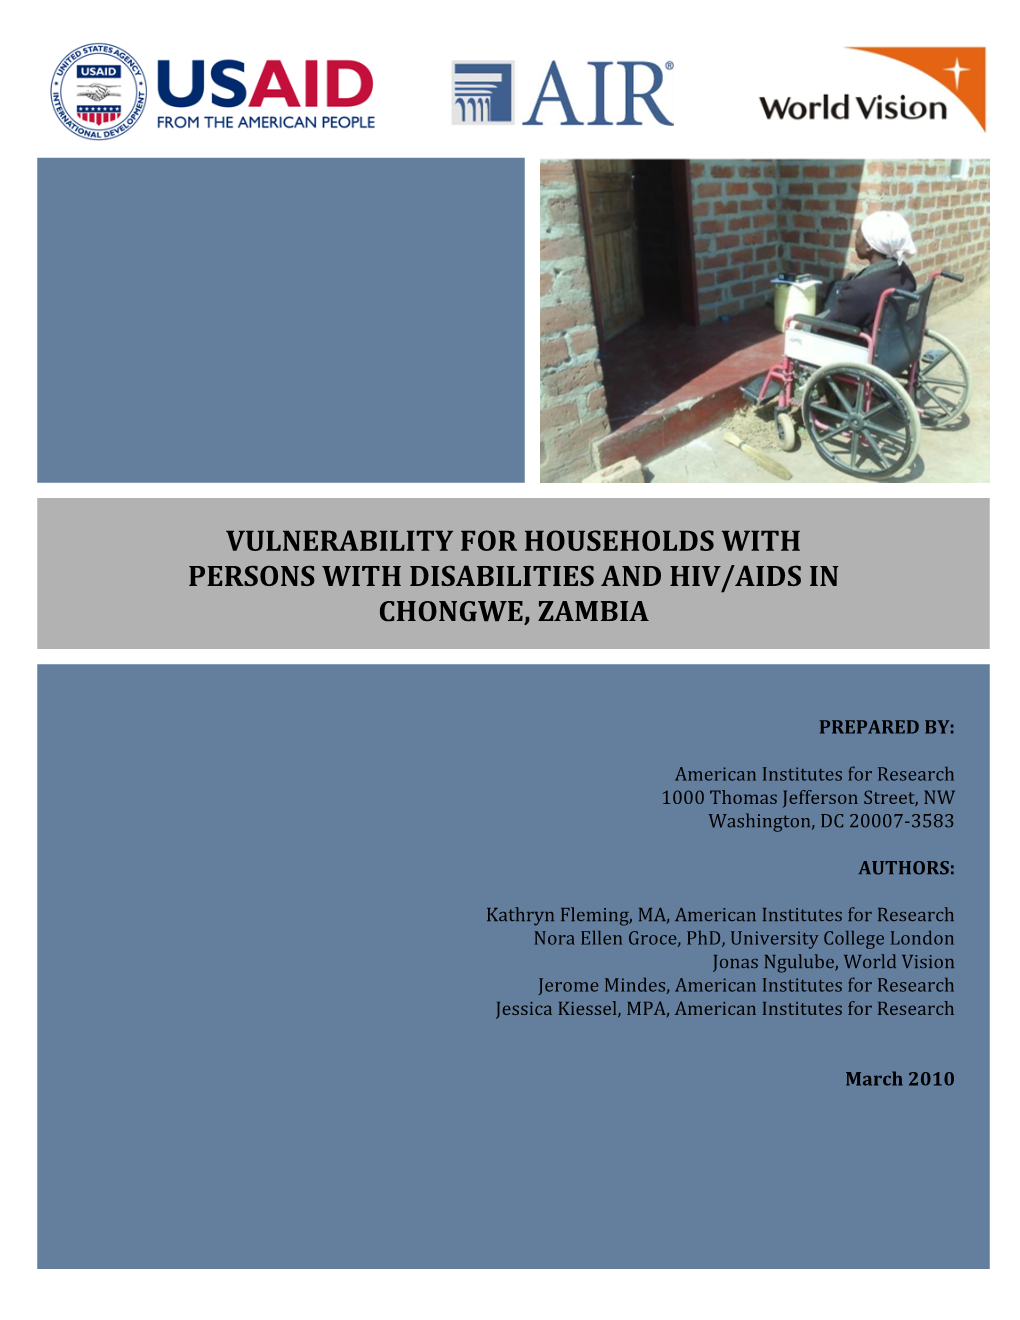 Vulnerability for Households with Persons with Disabilities and Hiv/Aids in Chongwe, Zambia